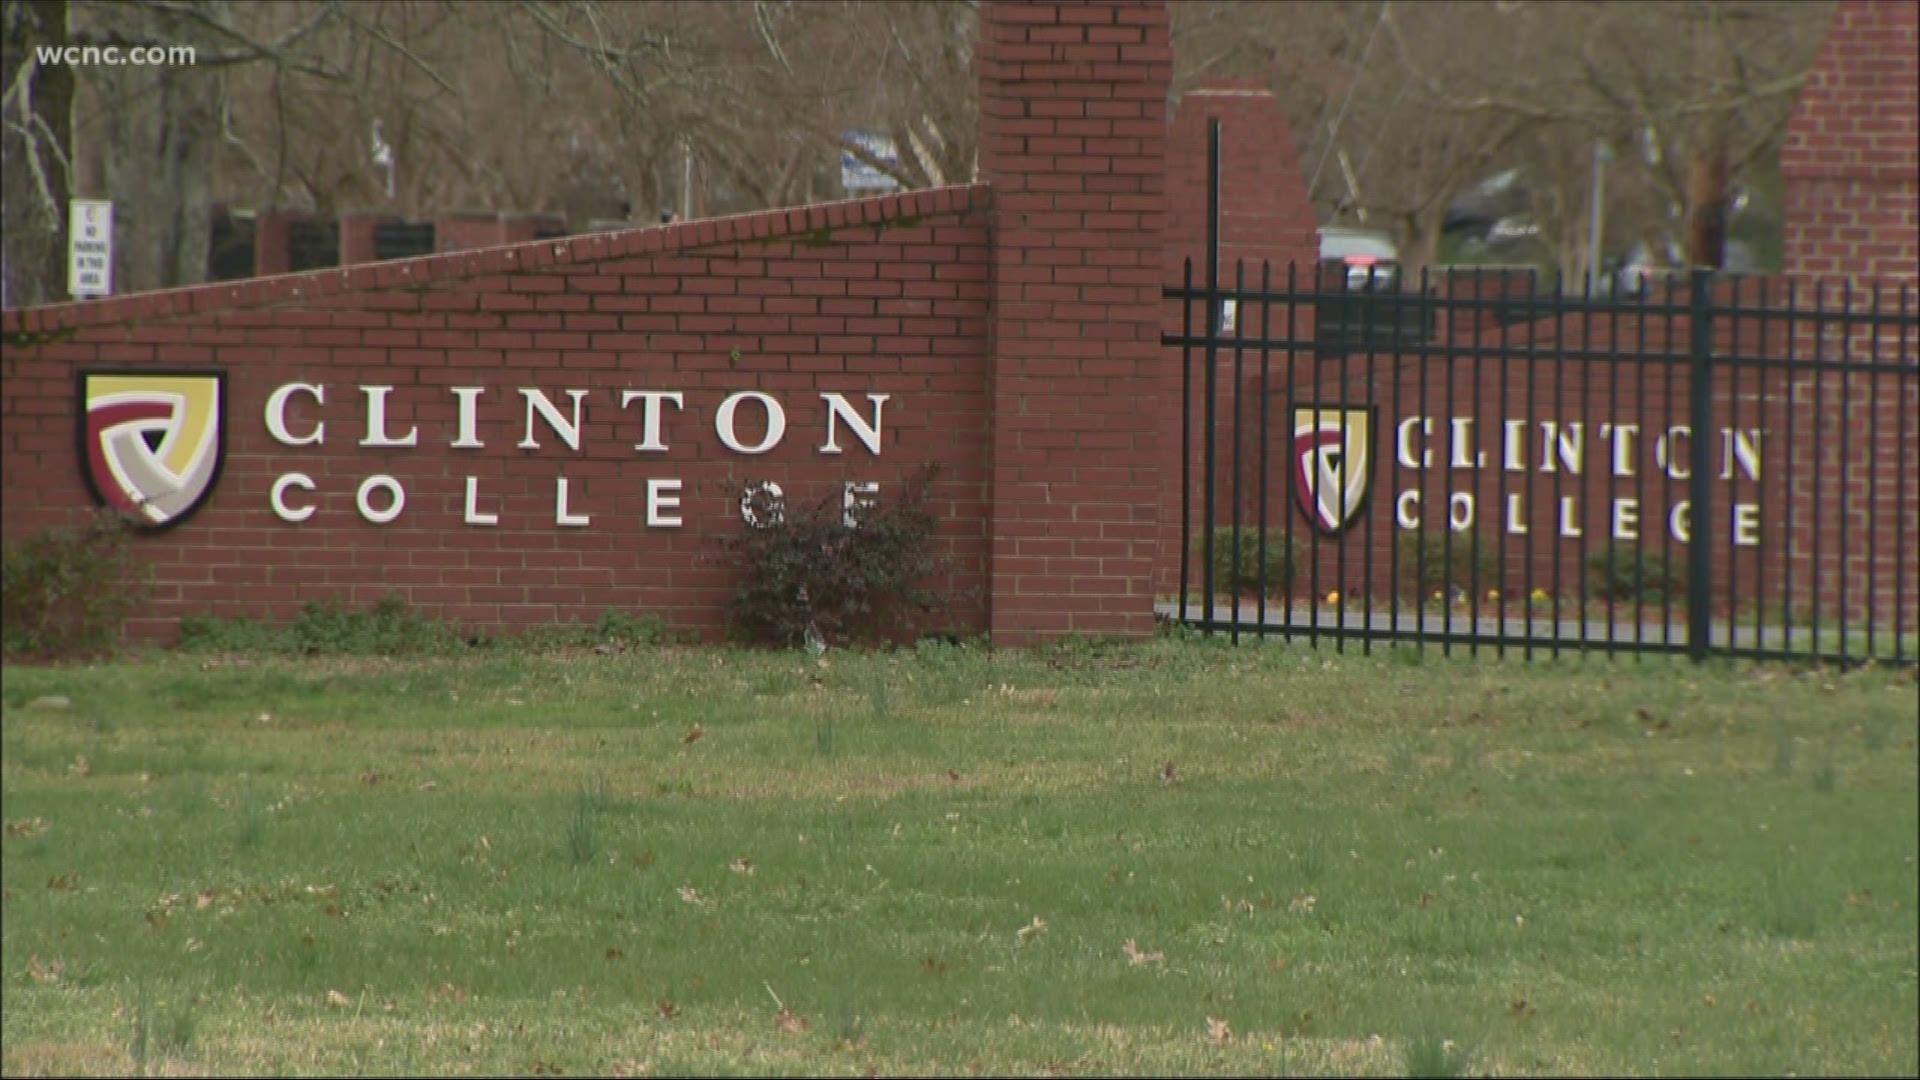 Rock Hill Police are investigating a shooting at a gym on Clinton College's campus. Two teens were shot just before 1 a.m.